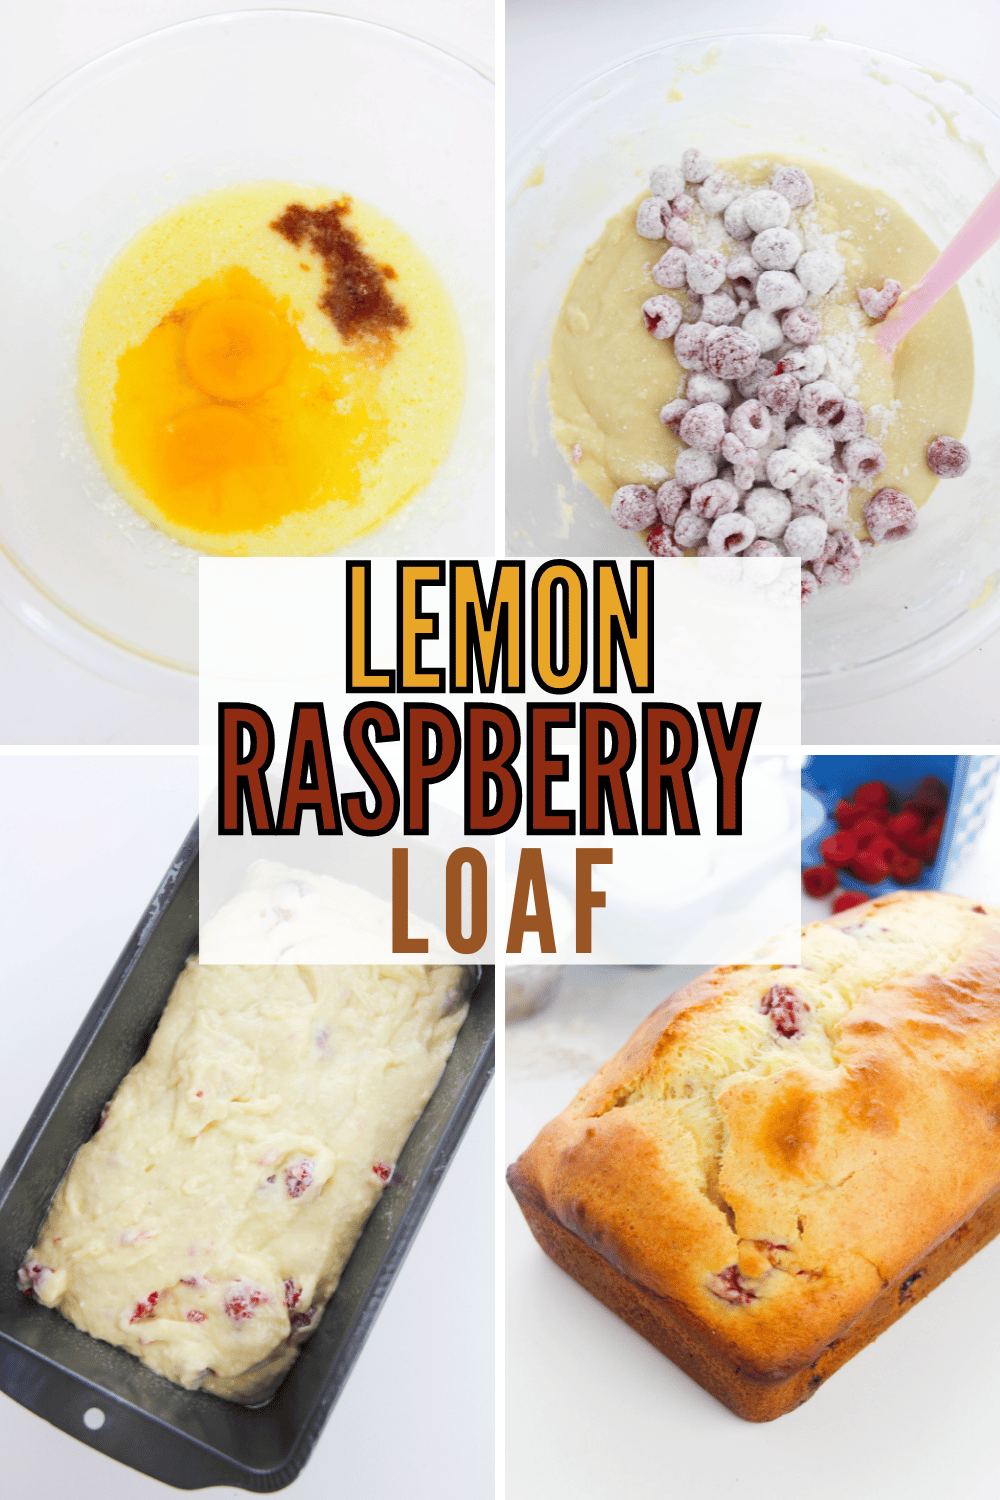 Lemon Raspberry Loaf is a delicious way to start your day! This quick and easy recipe is perfect for a busy morning. #lemonraspberryloaf #lemon #raspberry #breakfast #recipe via @wondermomwannab